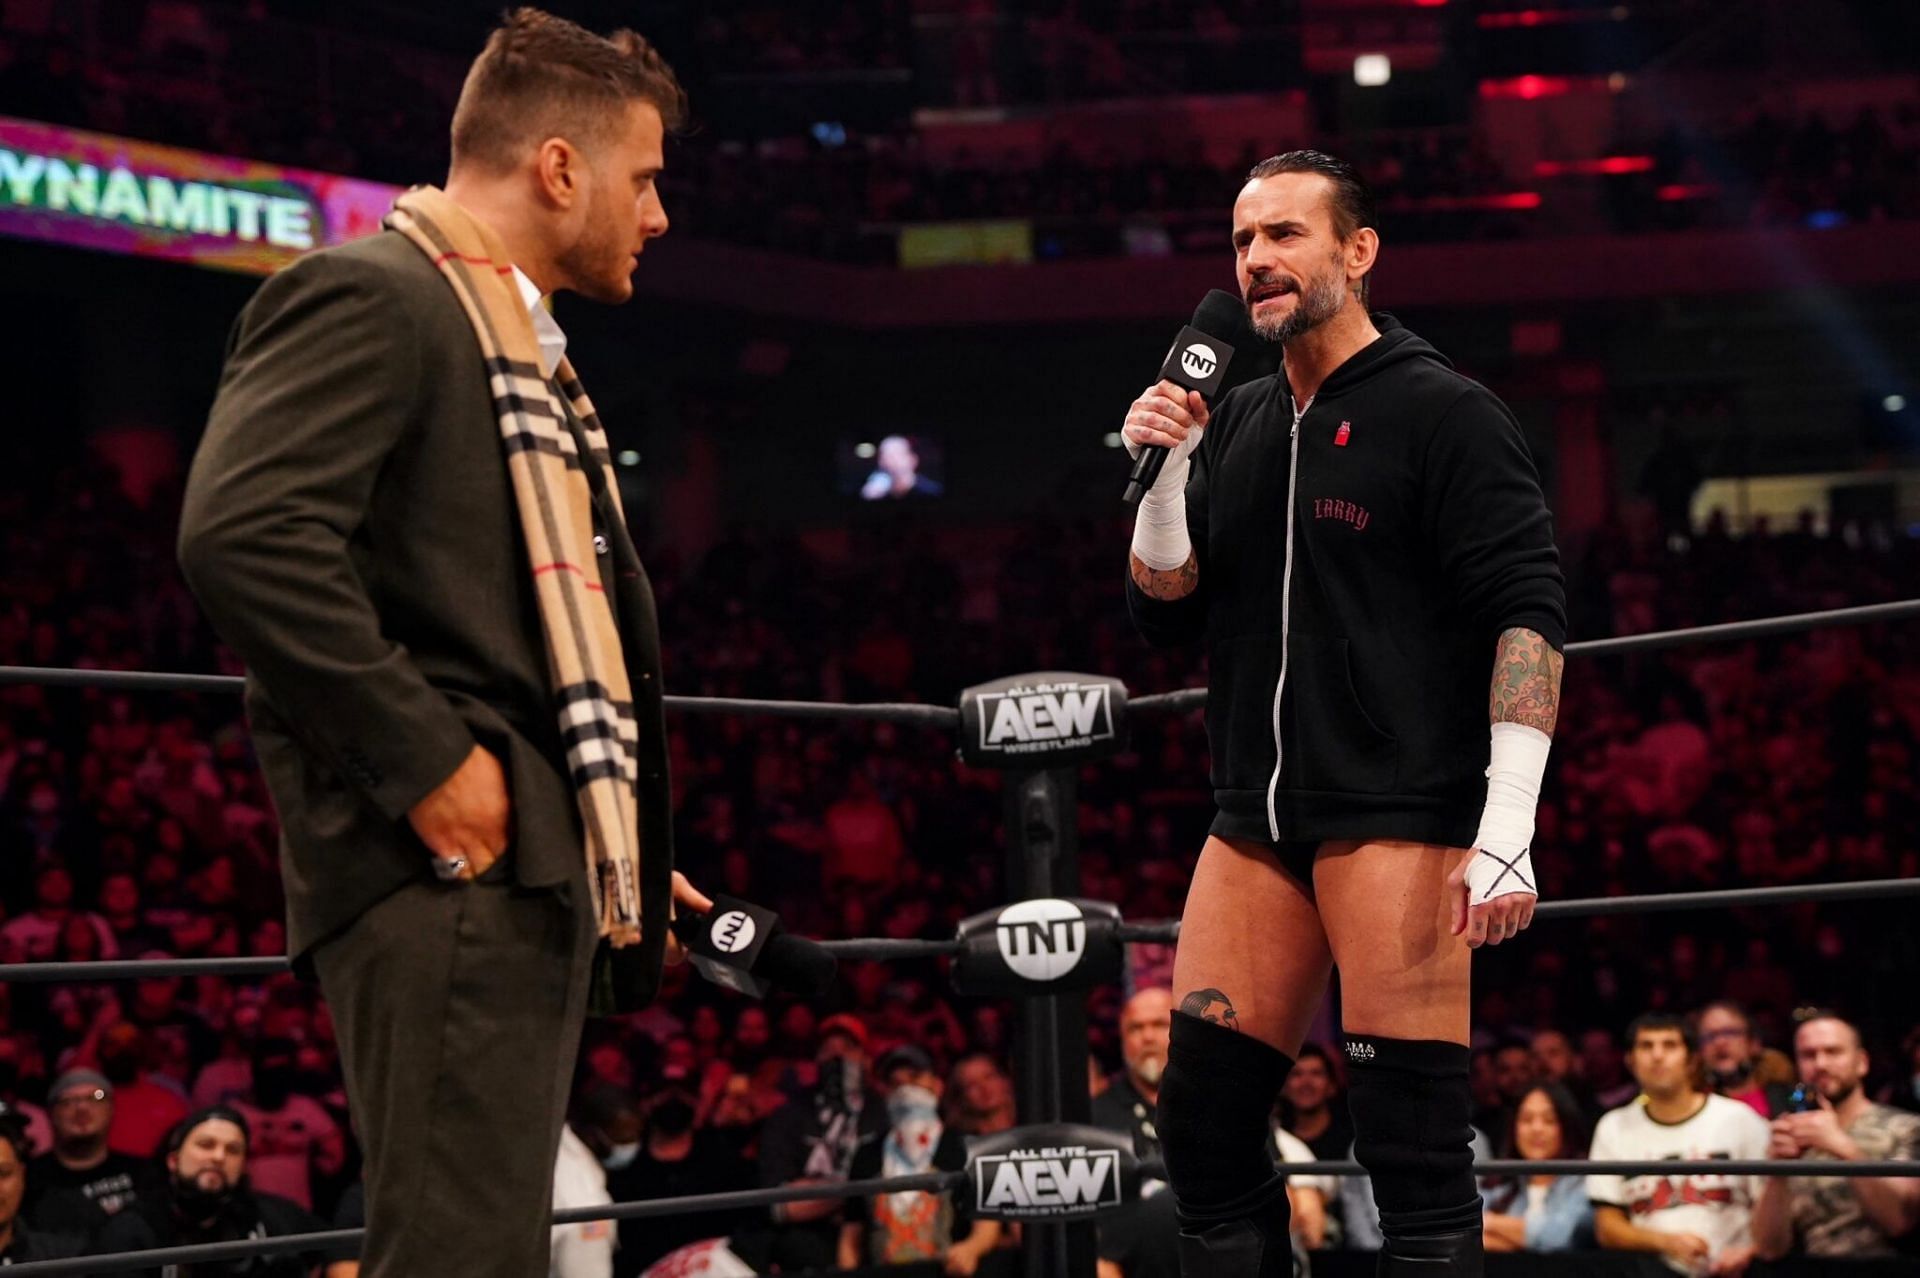 CM Punk and MJF traded shots at each other